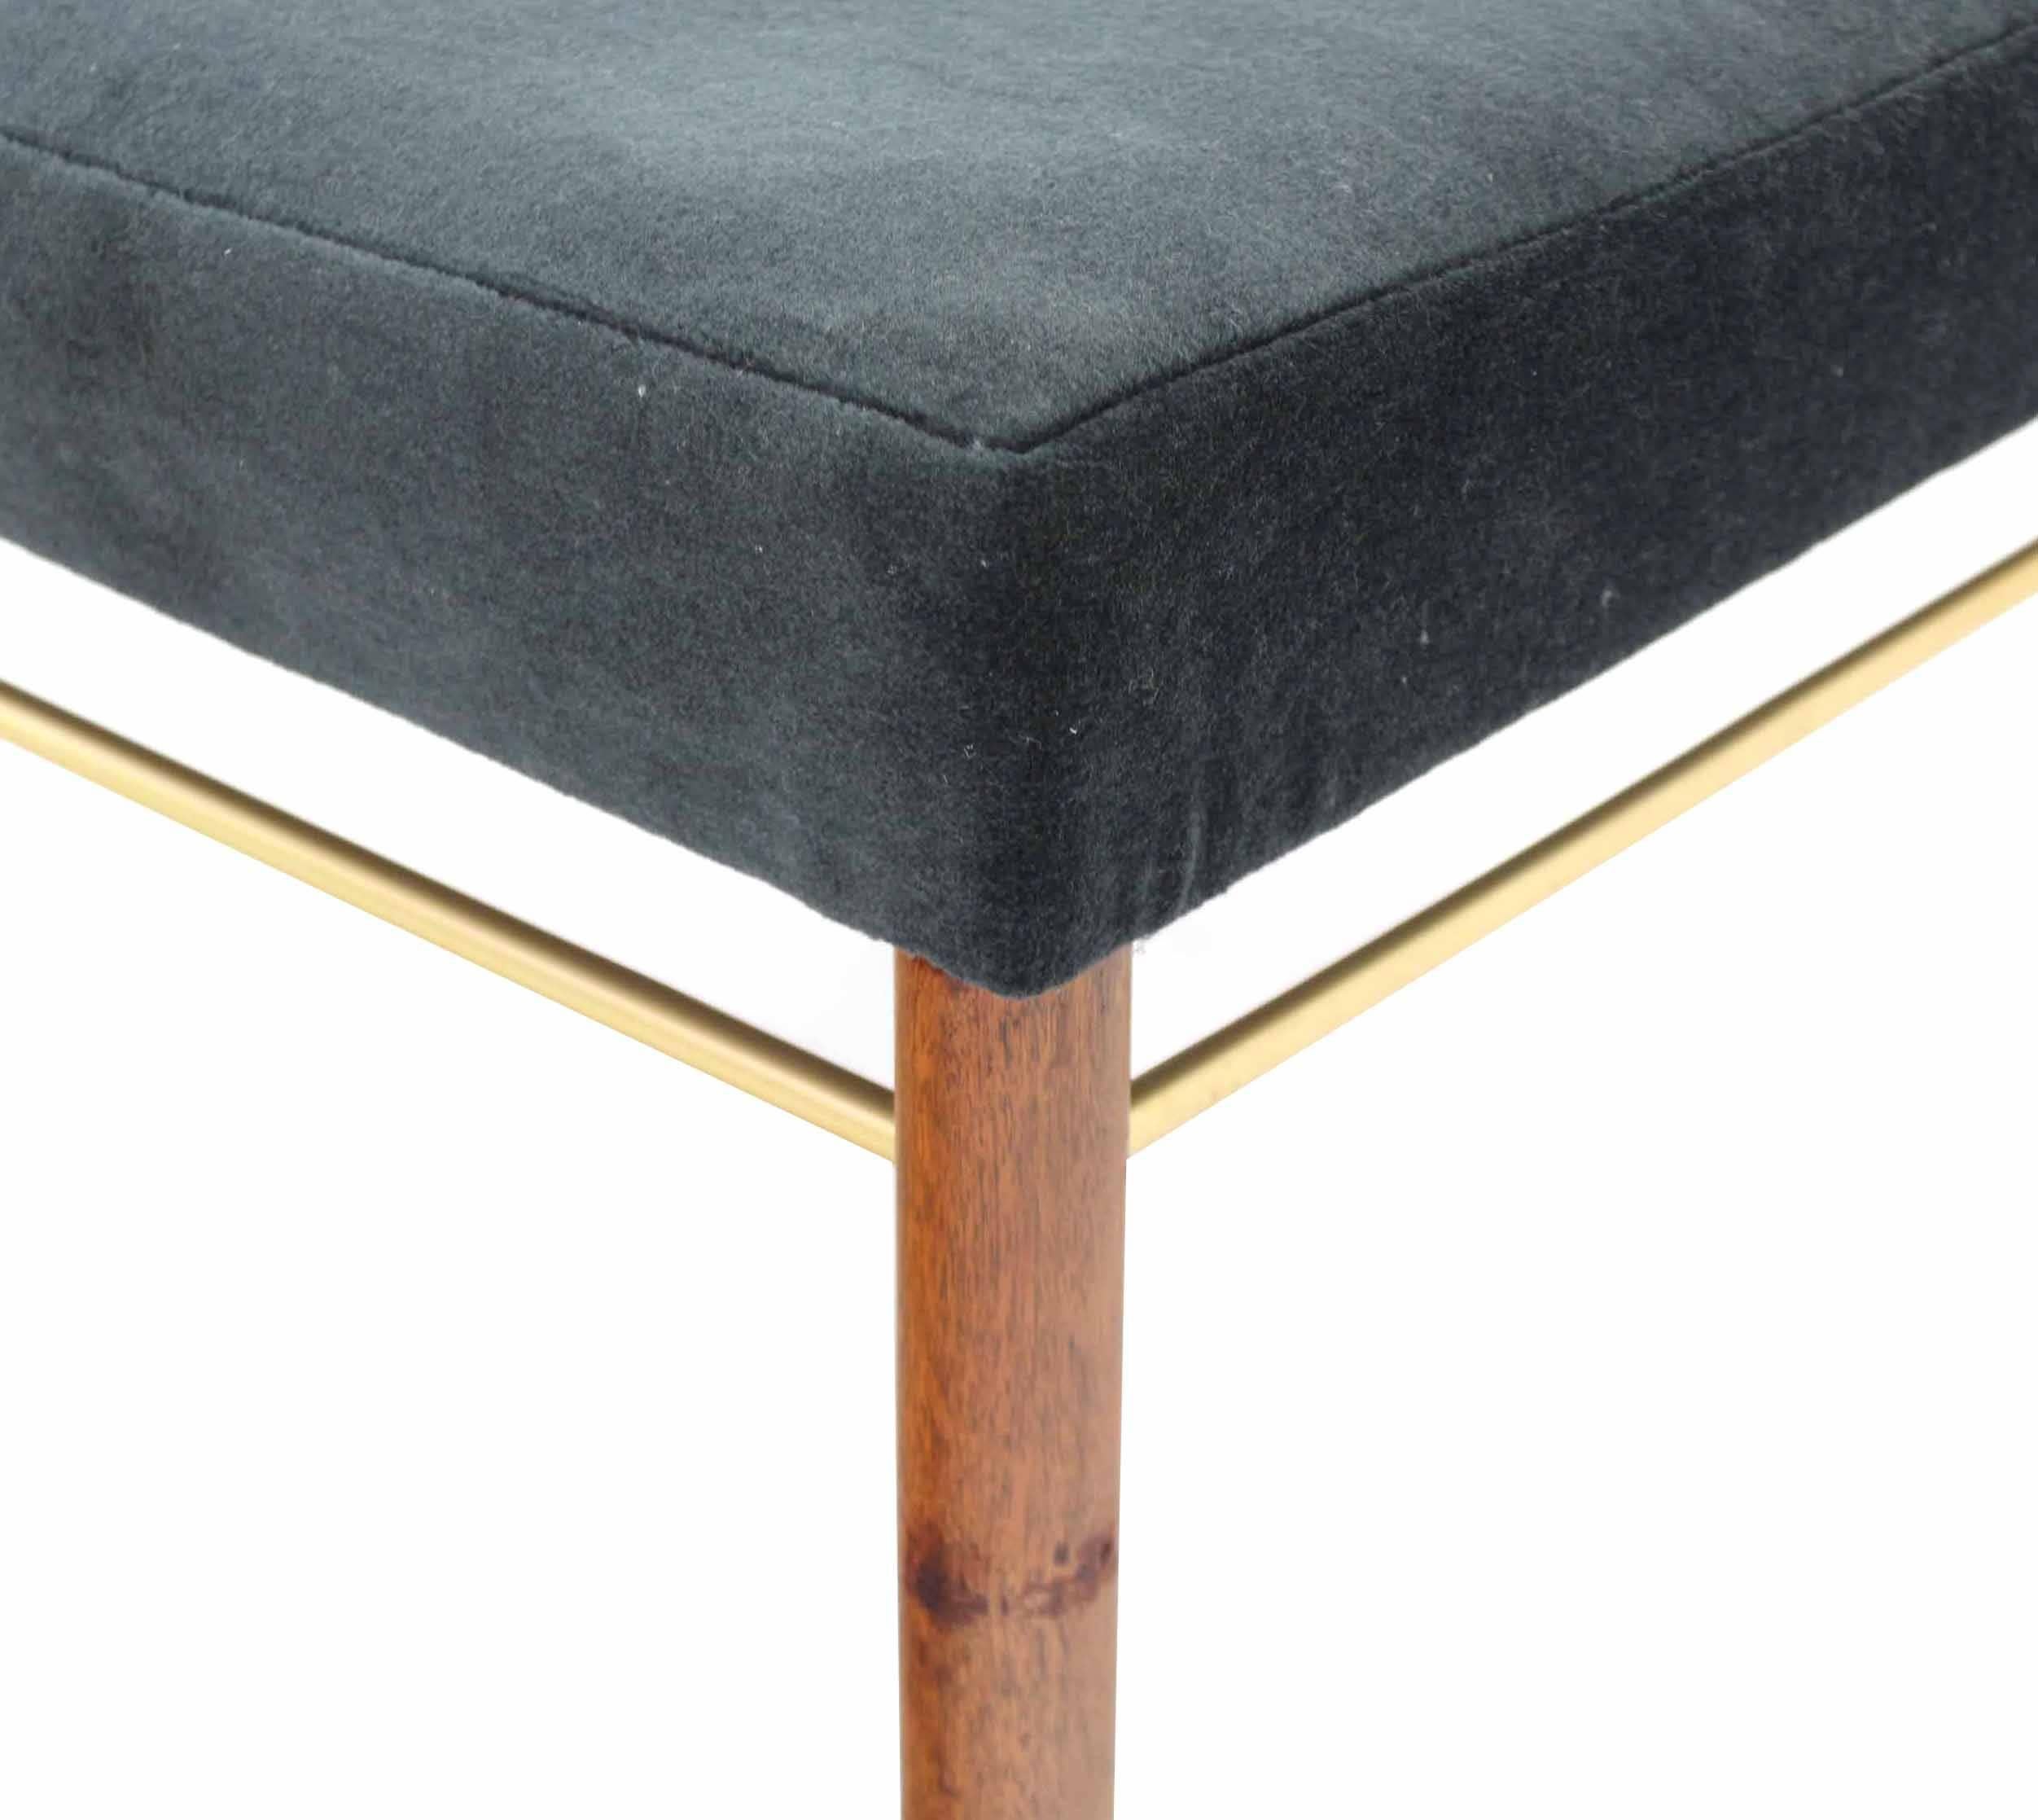 20th Century Square Newly Upholstered in Black or Charcoal Mohair Bench